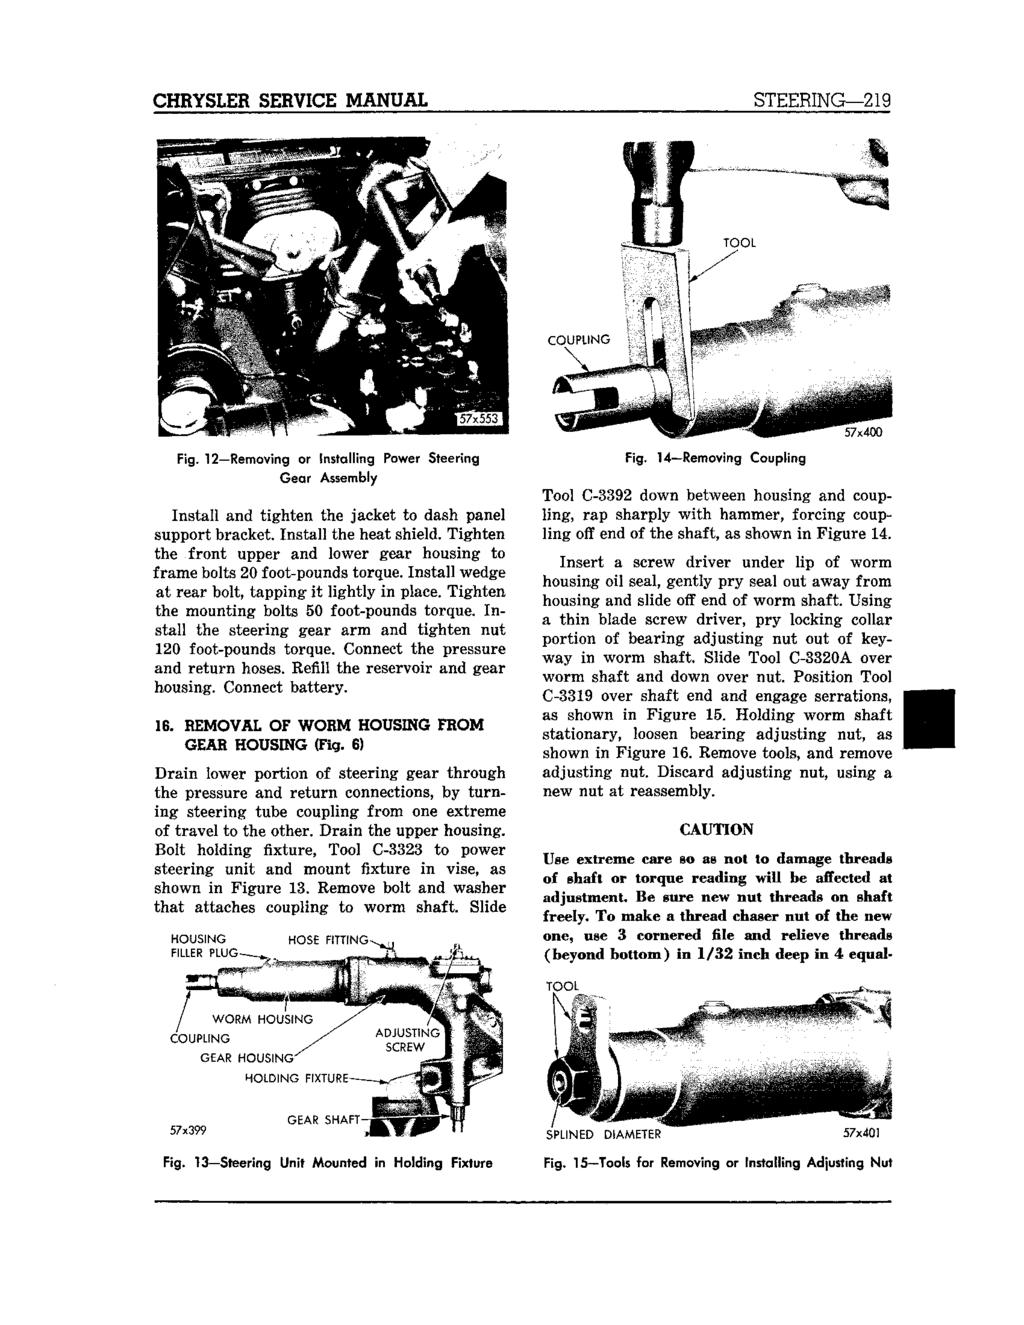 CHRYSLER SERVICE MANUAL STEERING 219 TOOL COUPLING v H 57x400 Fig. 12 Removing or Installing Power Steering Gear Assembly Install and tighten the jacket to dash panel support bracket.